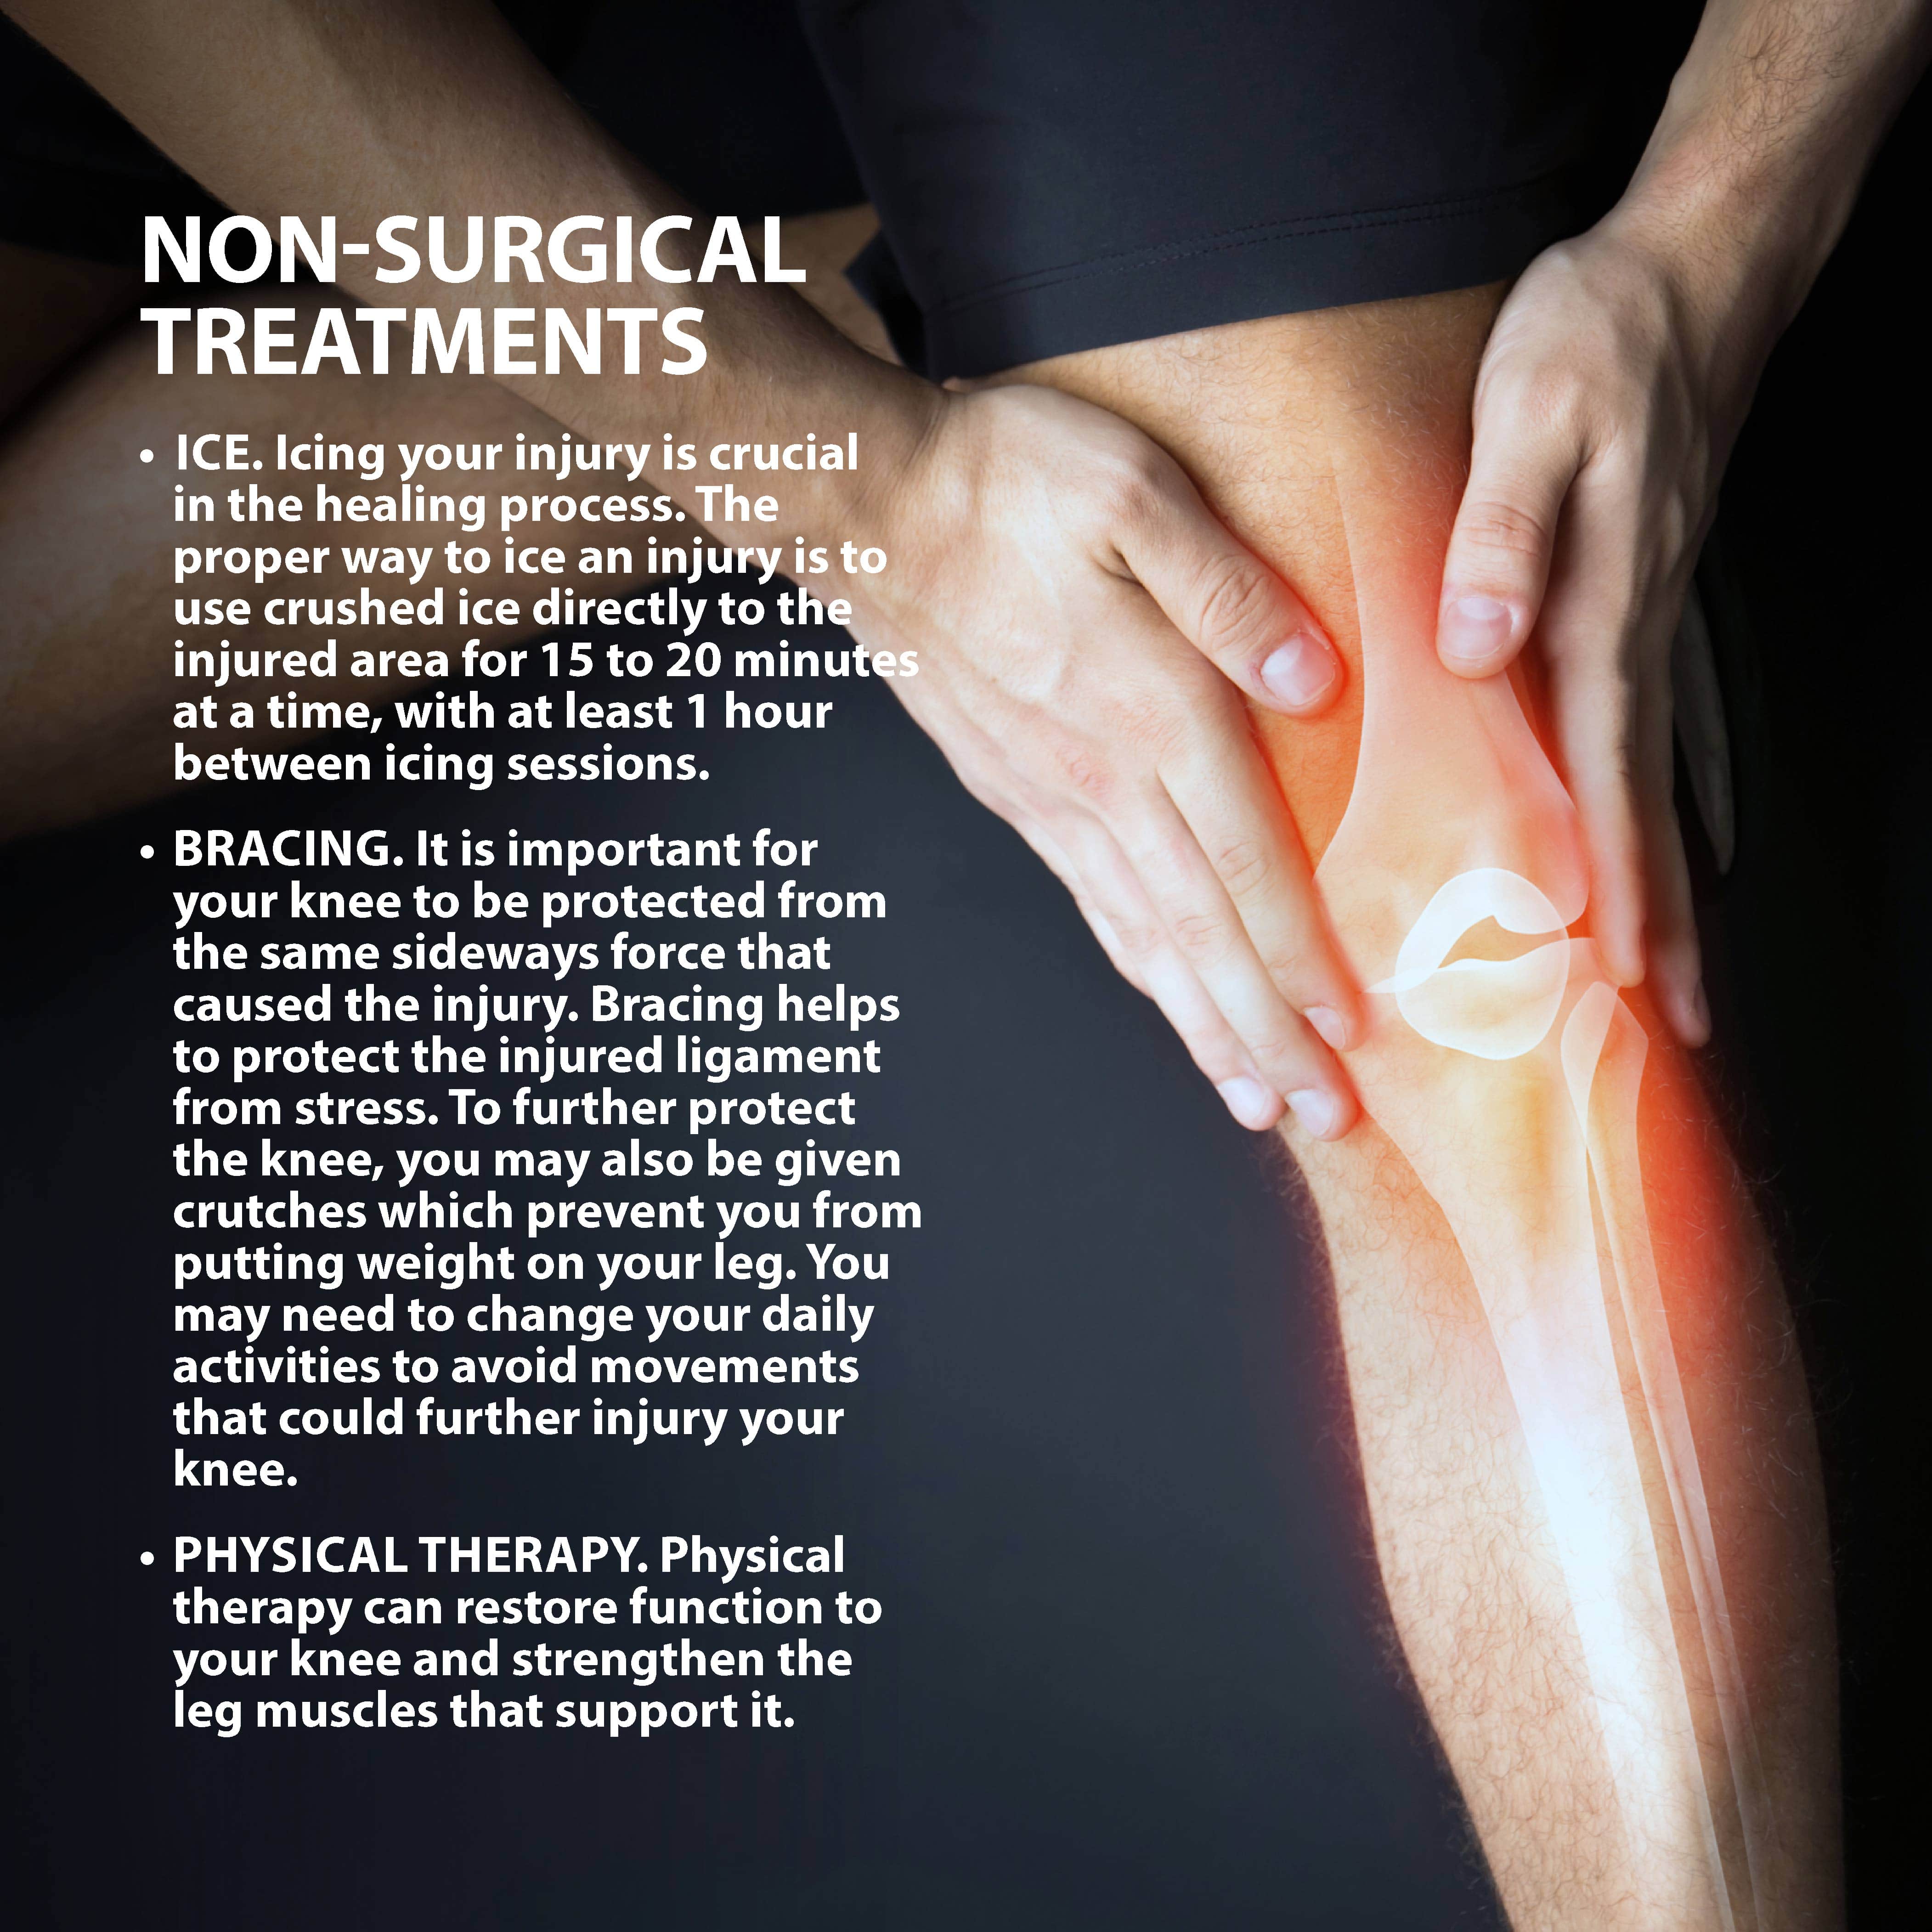 How do you heal a knee injury?